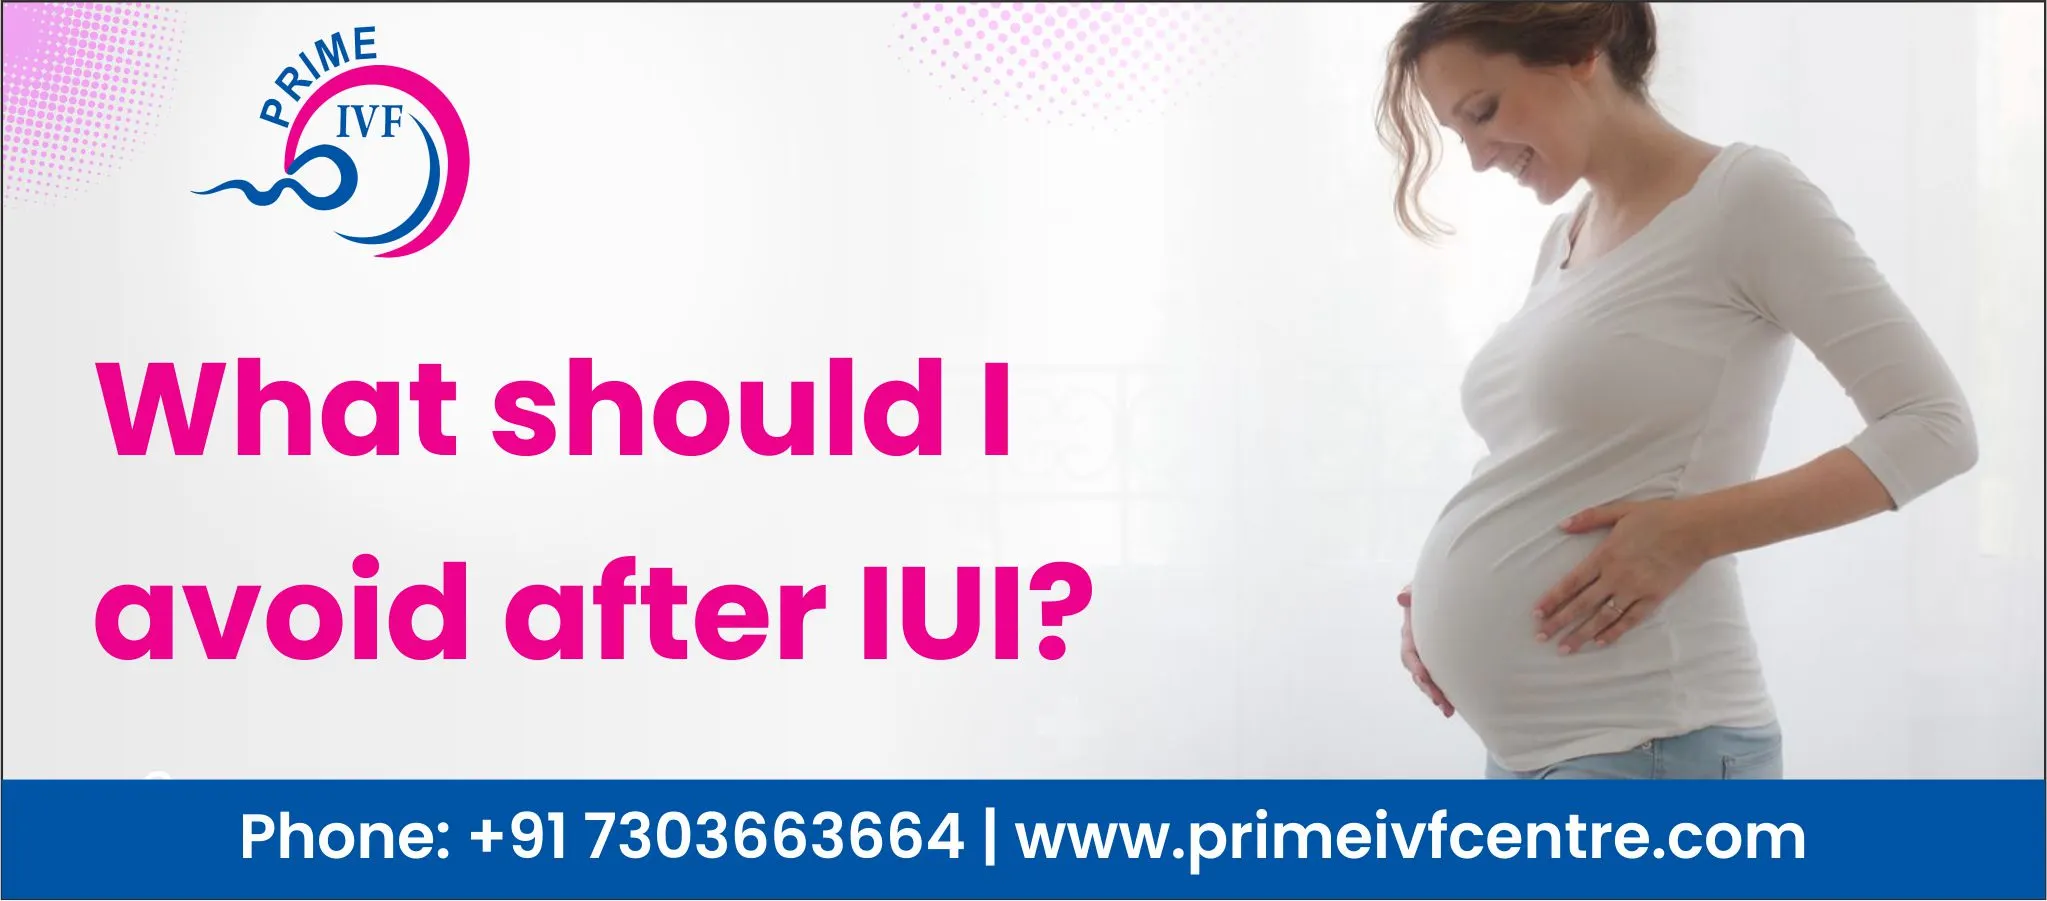 What should I avoid after IUI?